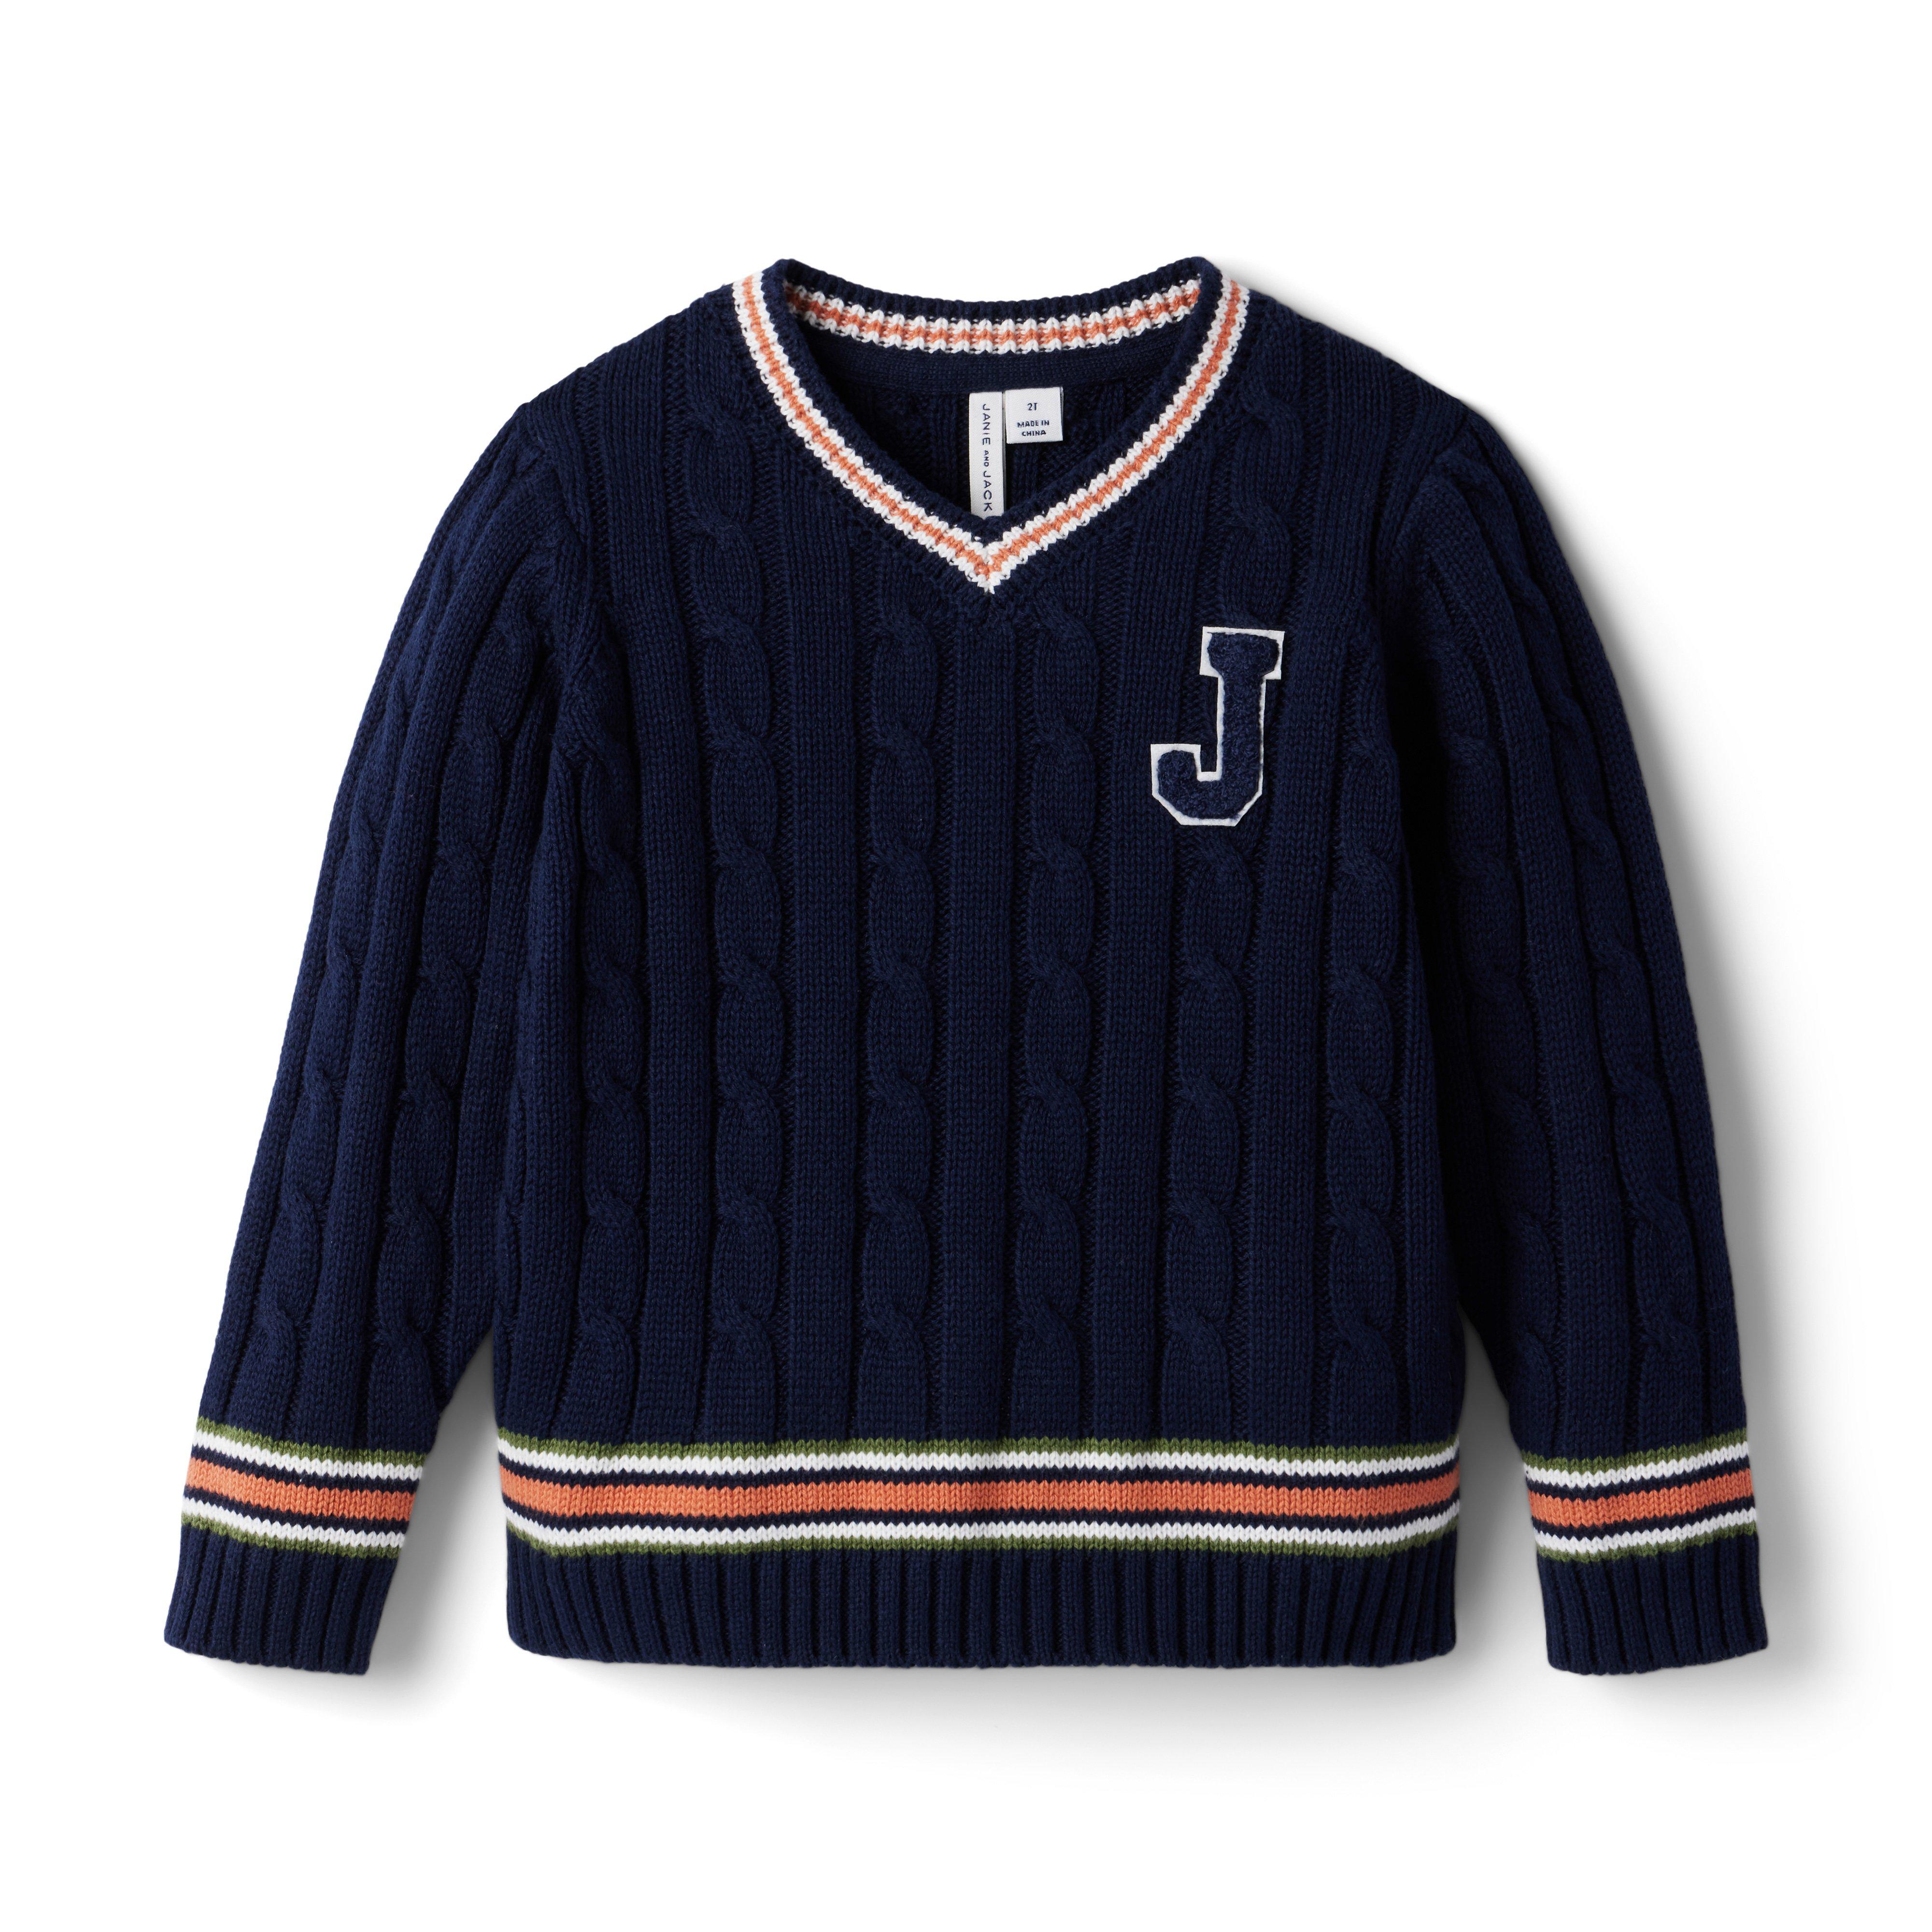 Boy Connor Navy Cable Knit Varsity Sweater by Janie and Jack